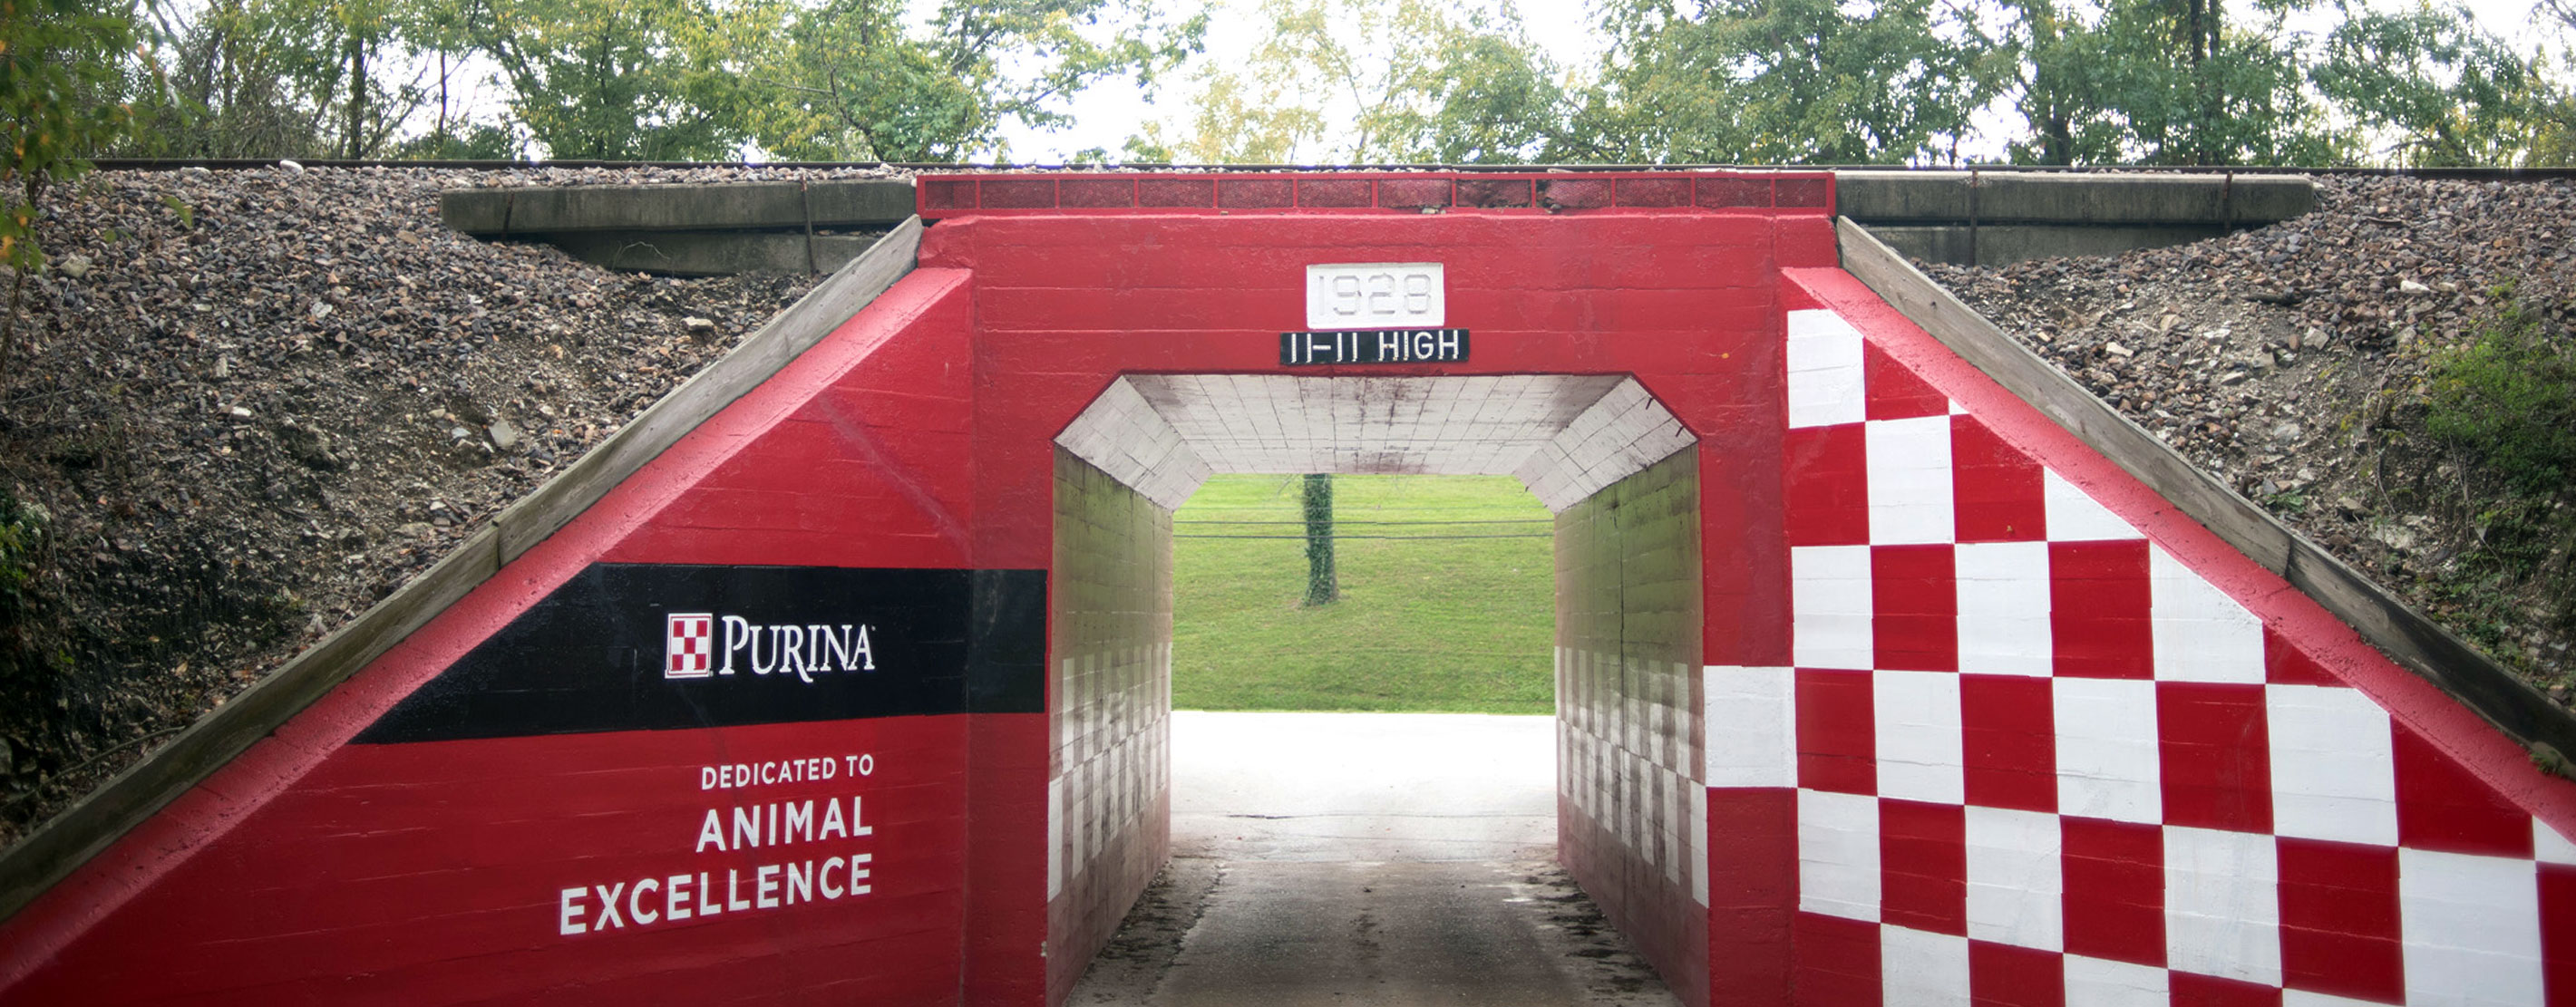 Entrance To "The Farm" With Prominent Purina Checkerboard On A Wall